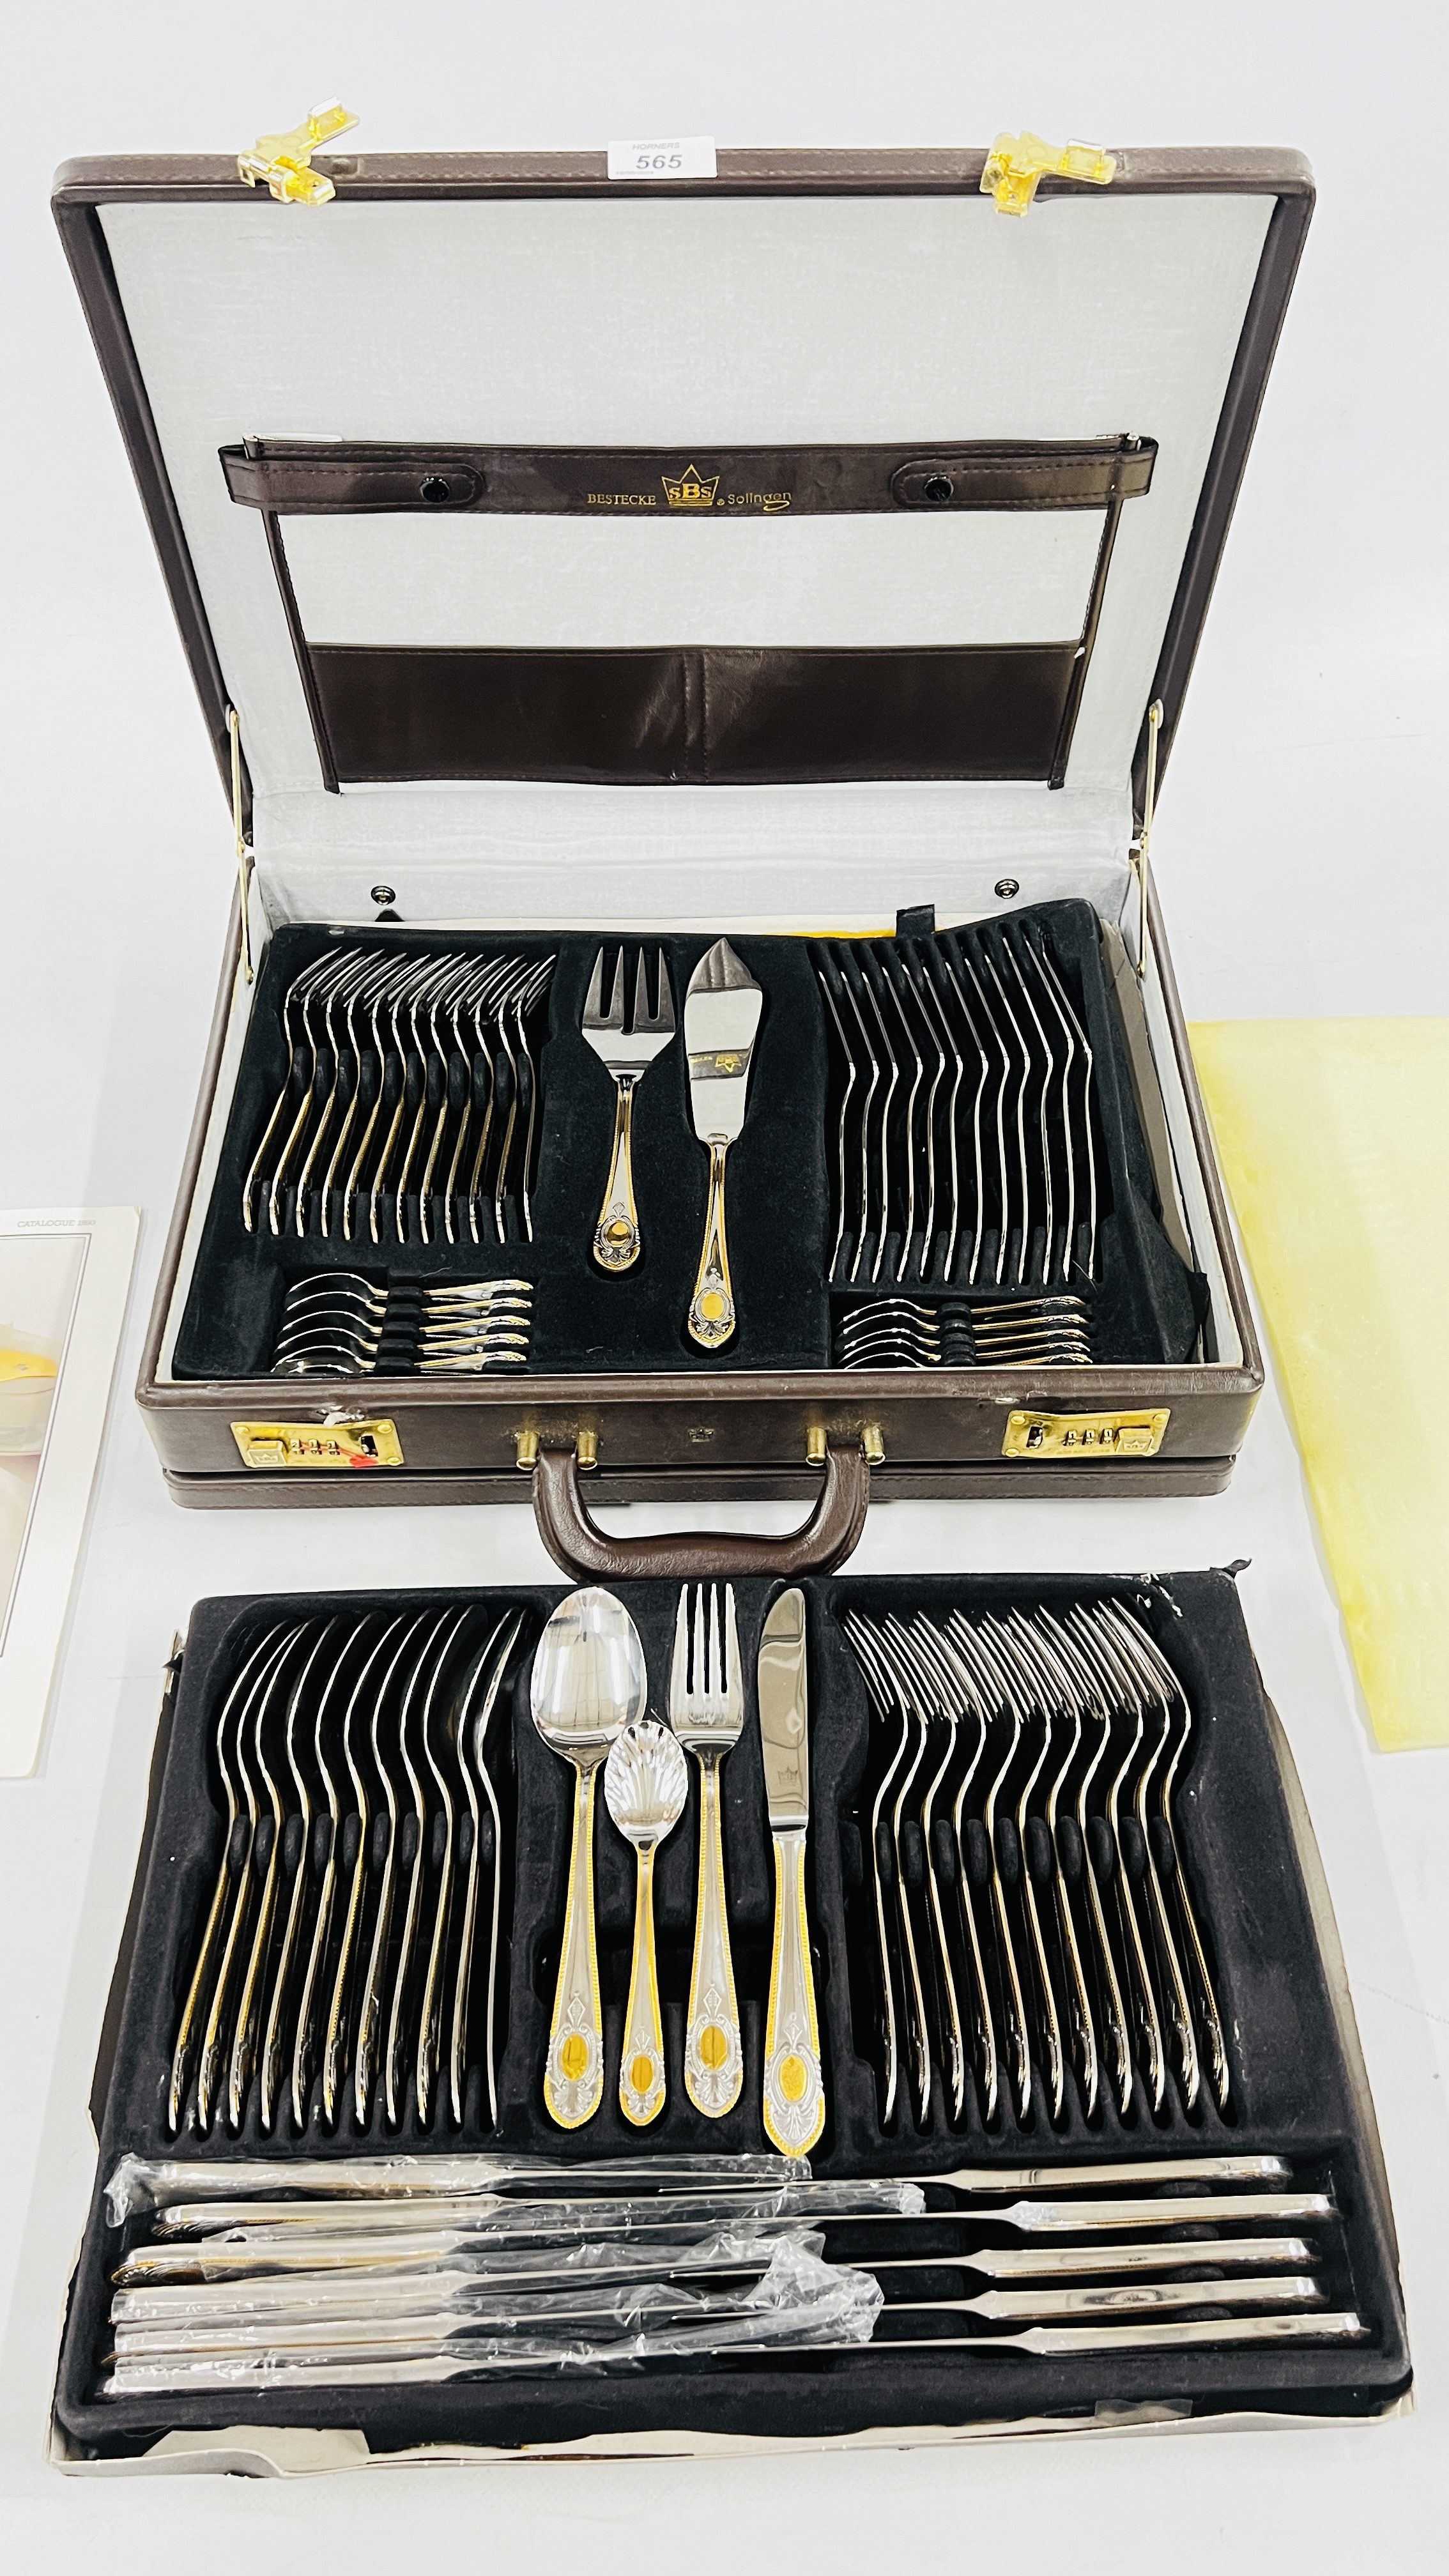 A CASED CANTEEN OF SBS SOLINGEN CUTLERY (12 PLACE SETTING). - Image 2 of 8